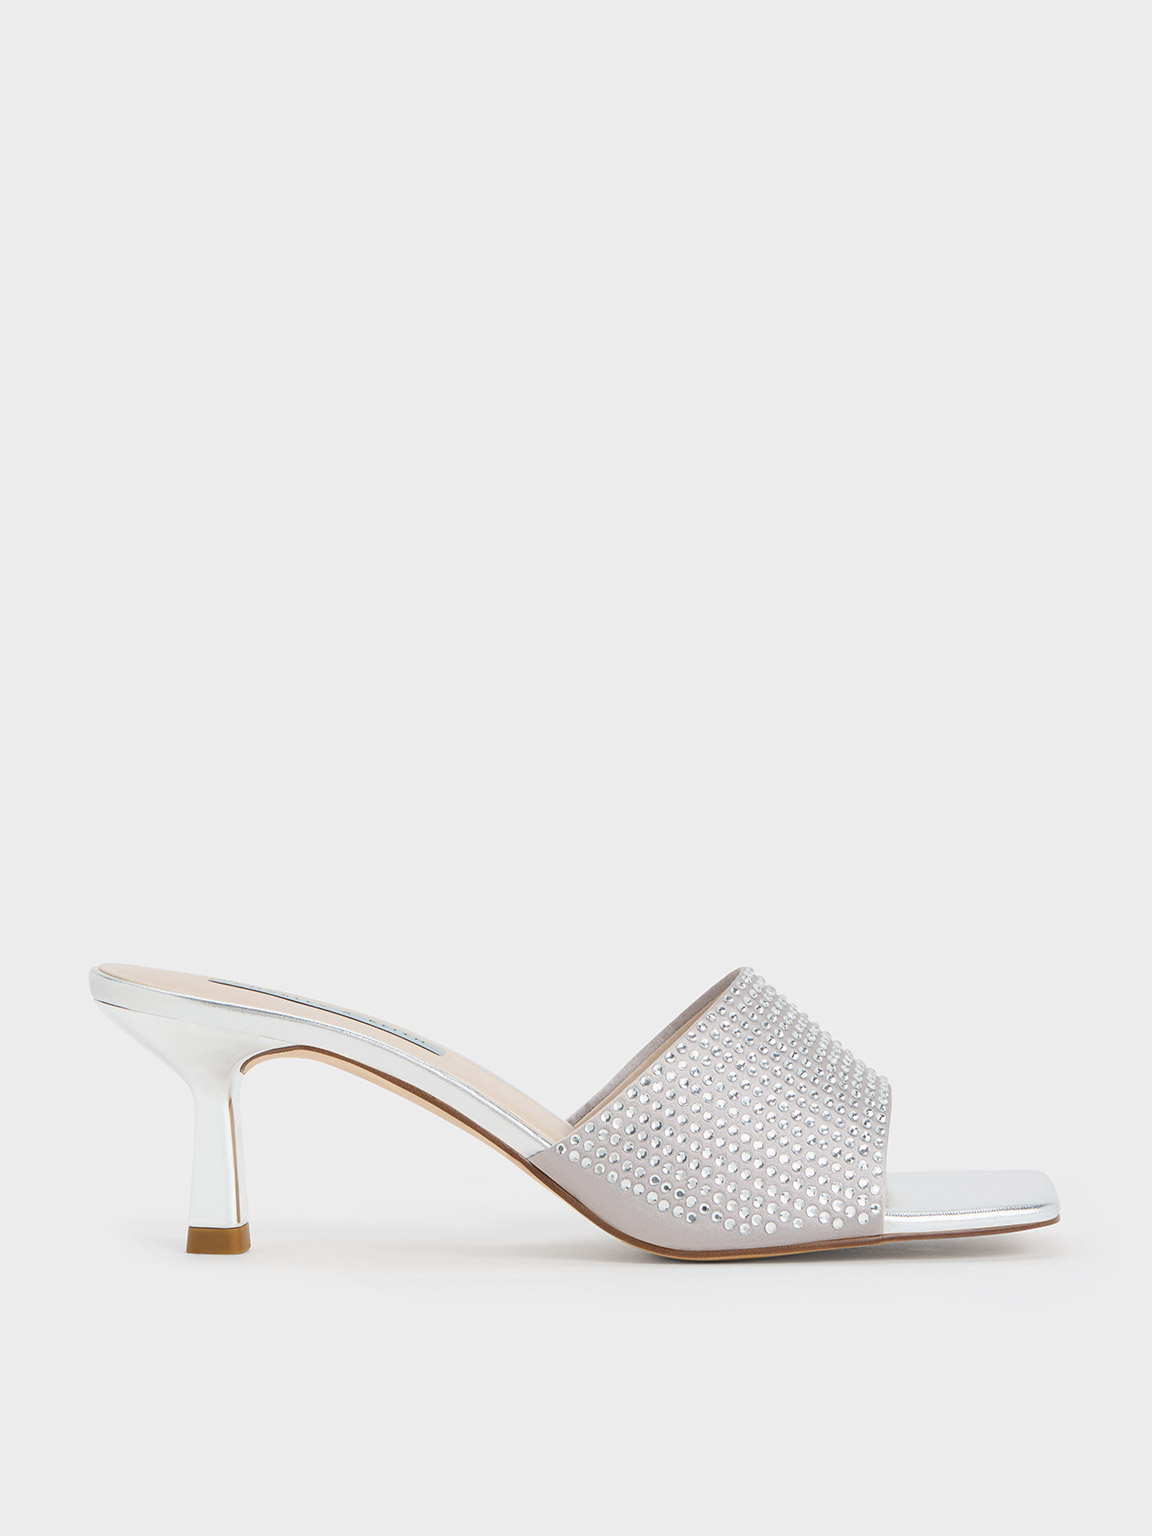 Silver Satin Crystal-Embellished Heeled Mules | CHARLES & KEITH